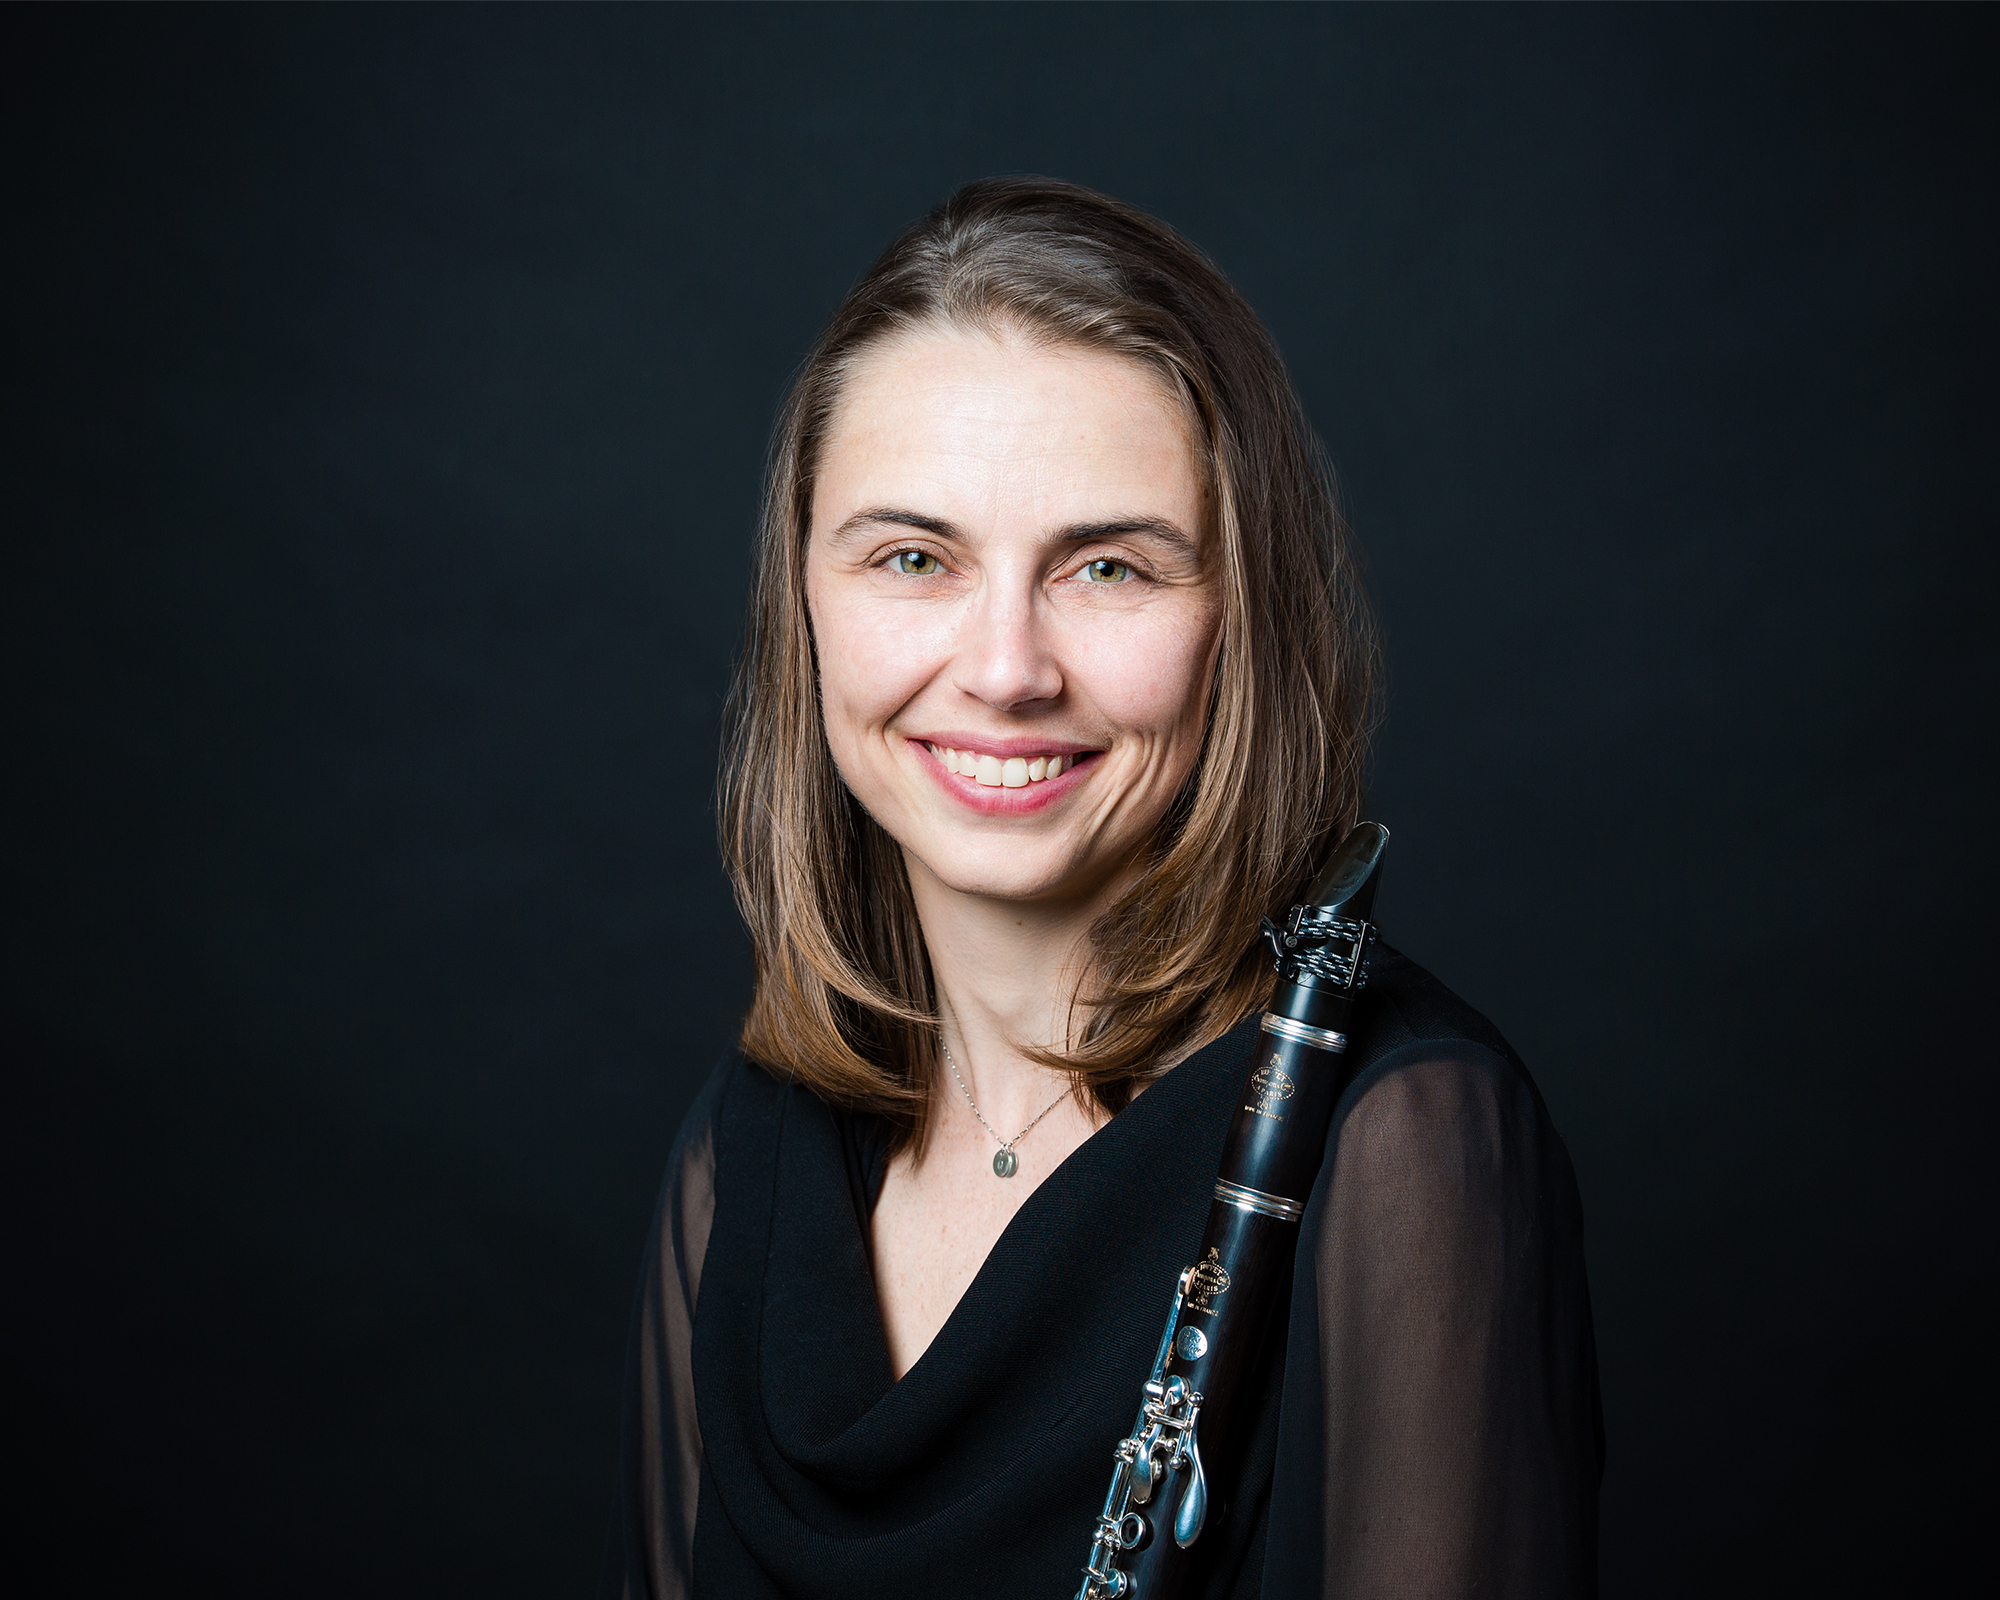 Caucasian woman with light brown, shoulder length hair smiling and holding clarinet. 